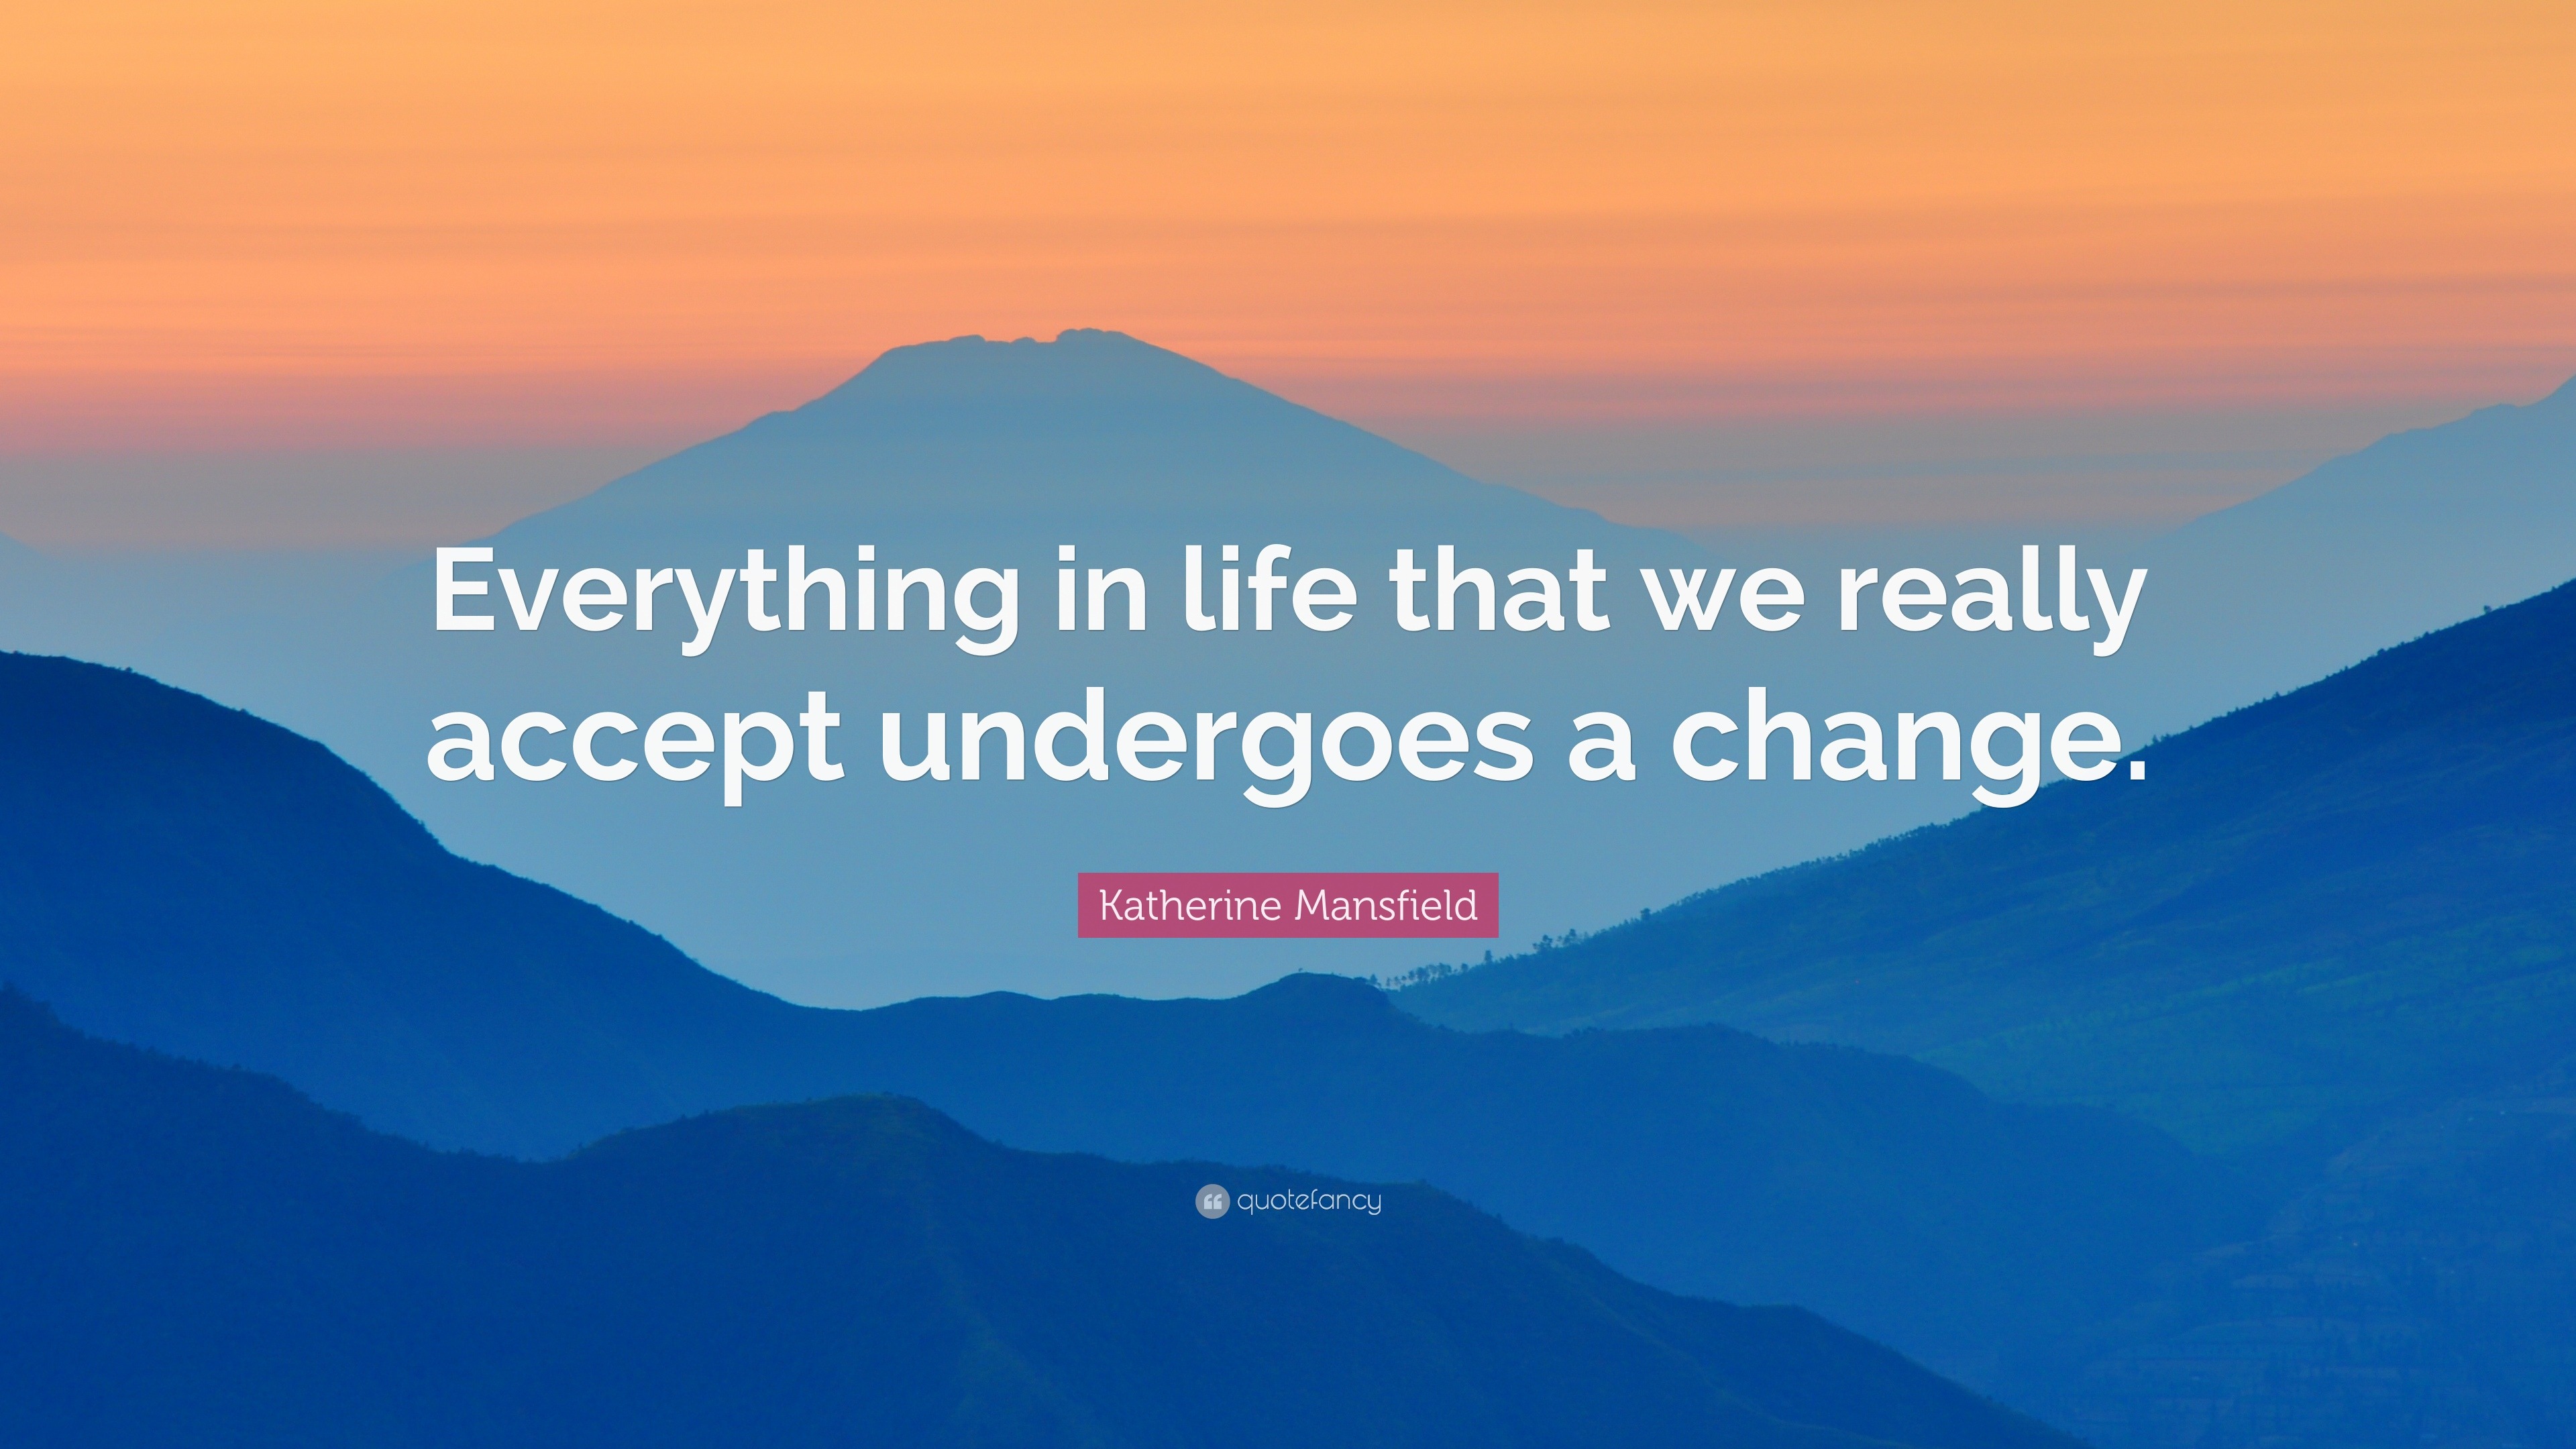 Katherine Mansfield Quote: “Everything in life that we really accept ...